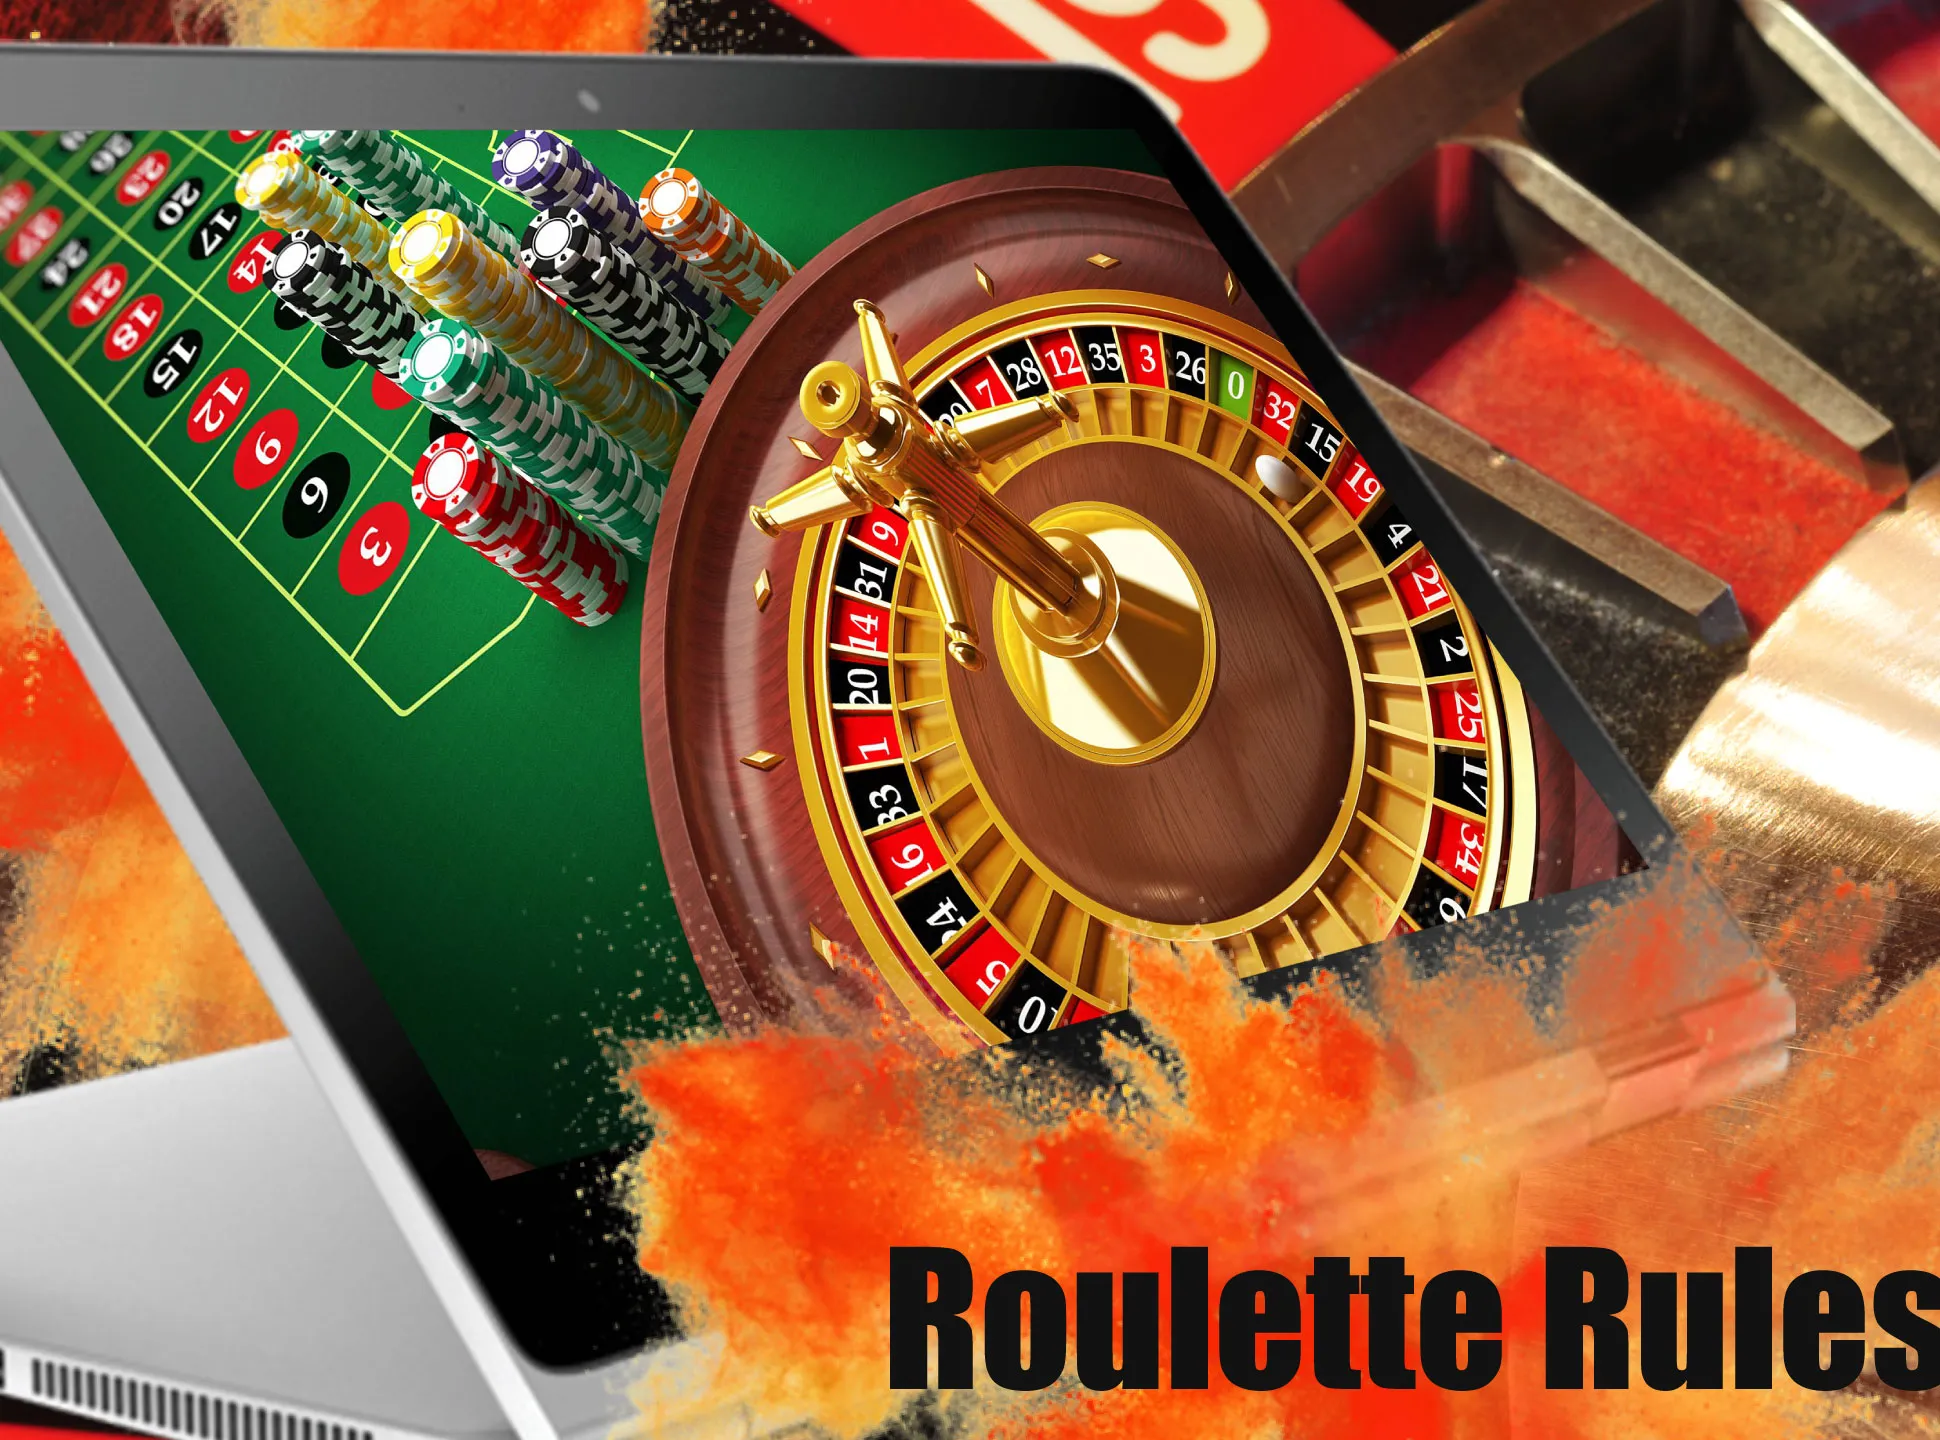 Learn the rules of the game to play and win roulette on Fairplay.